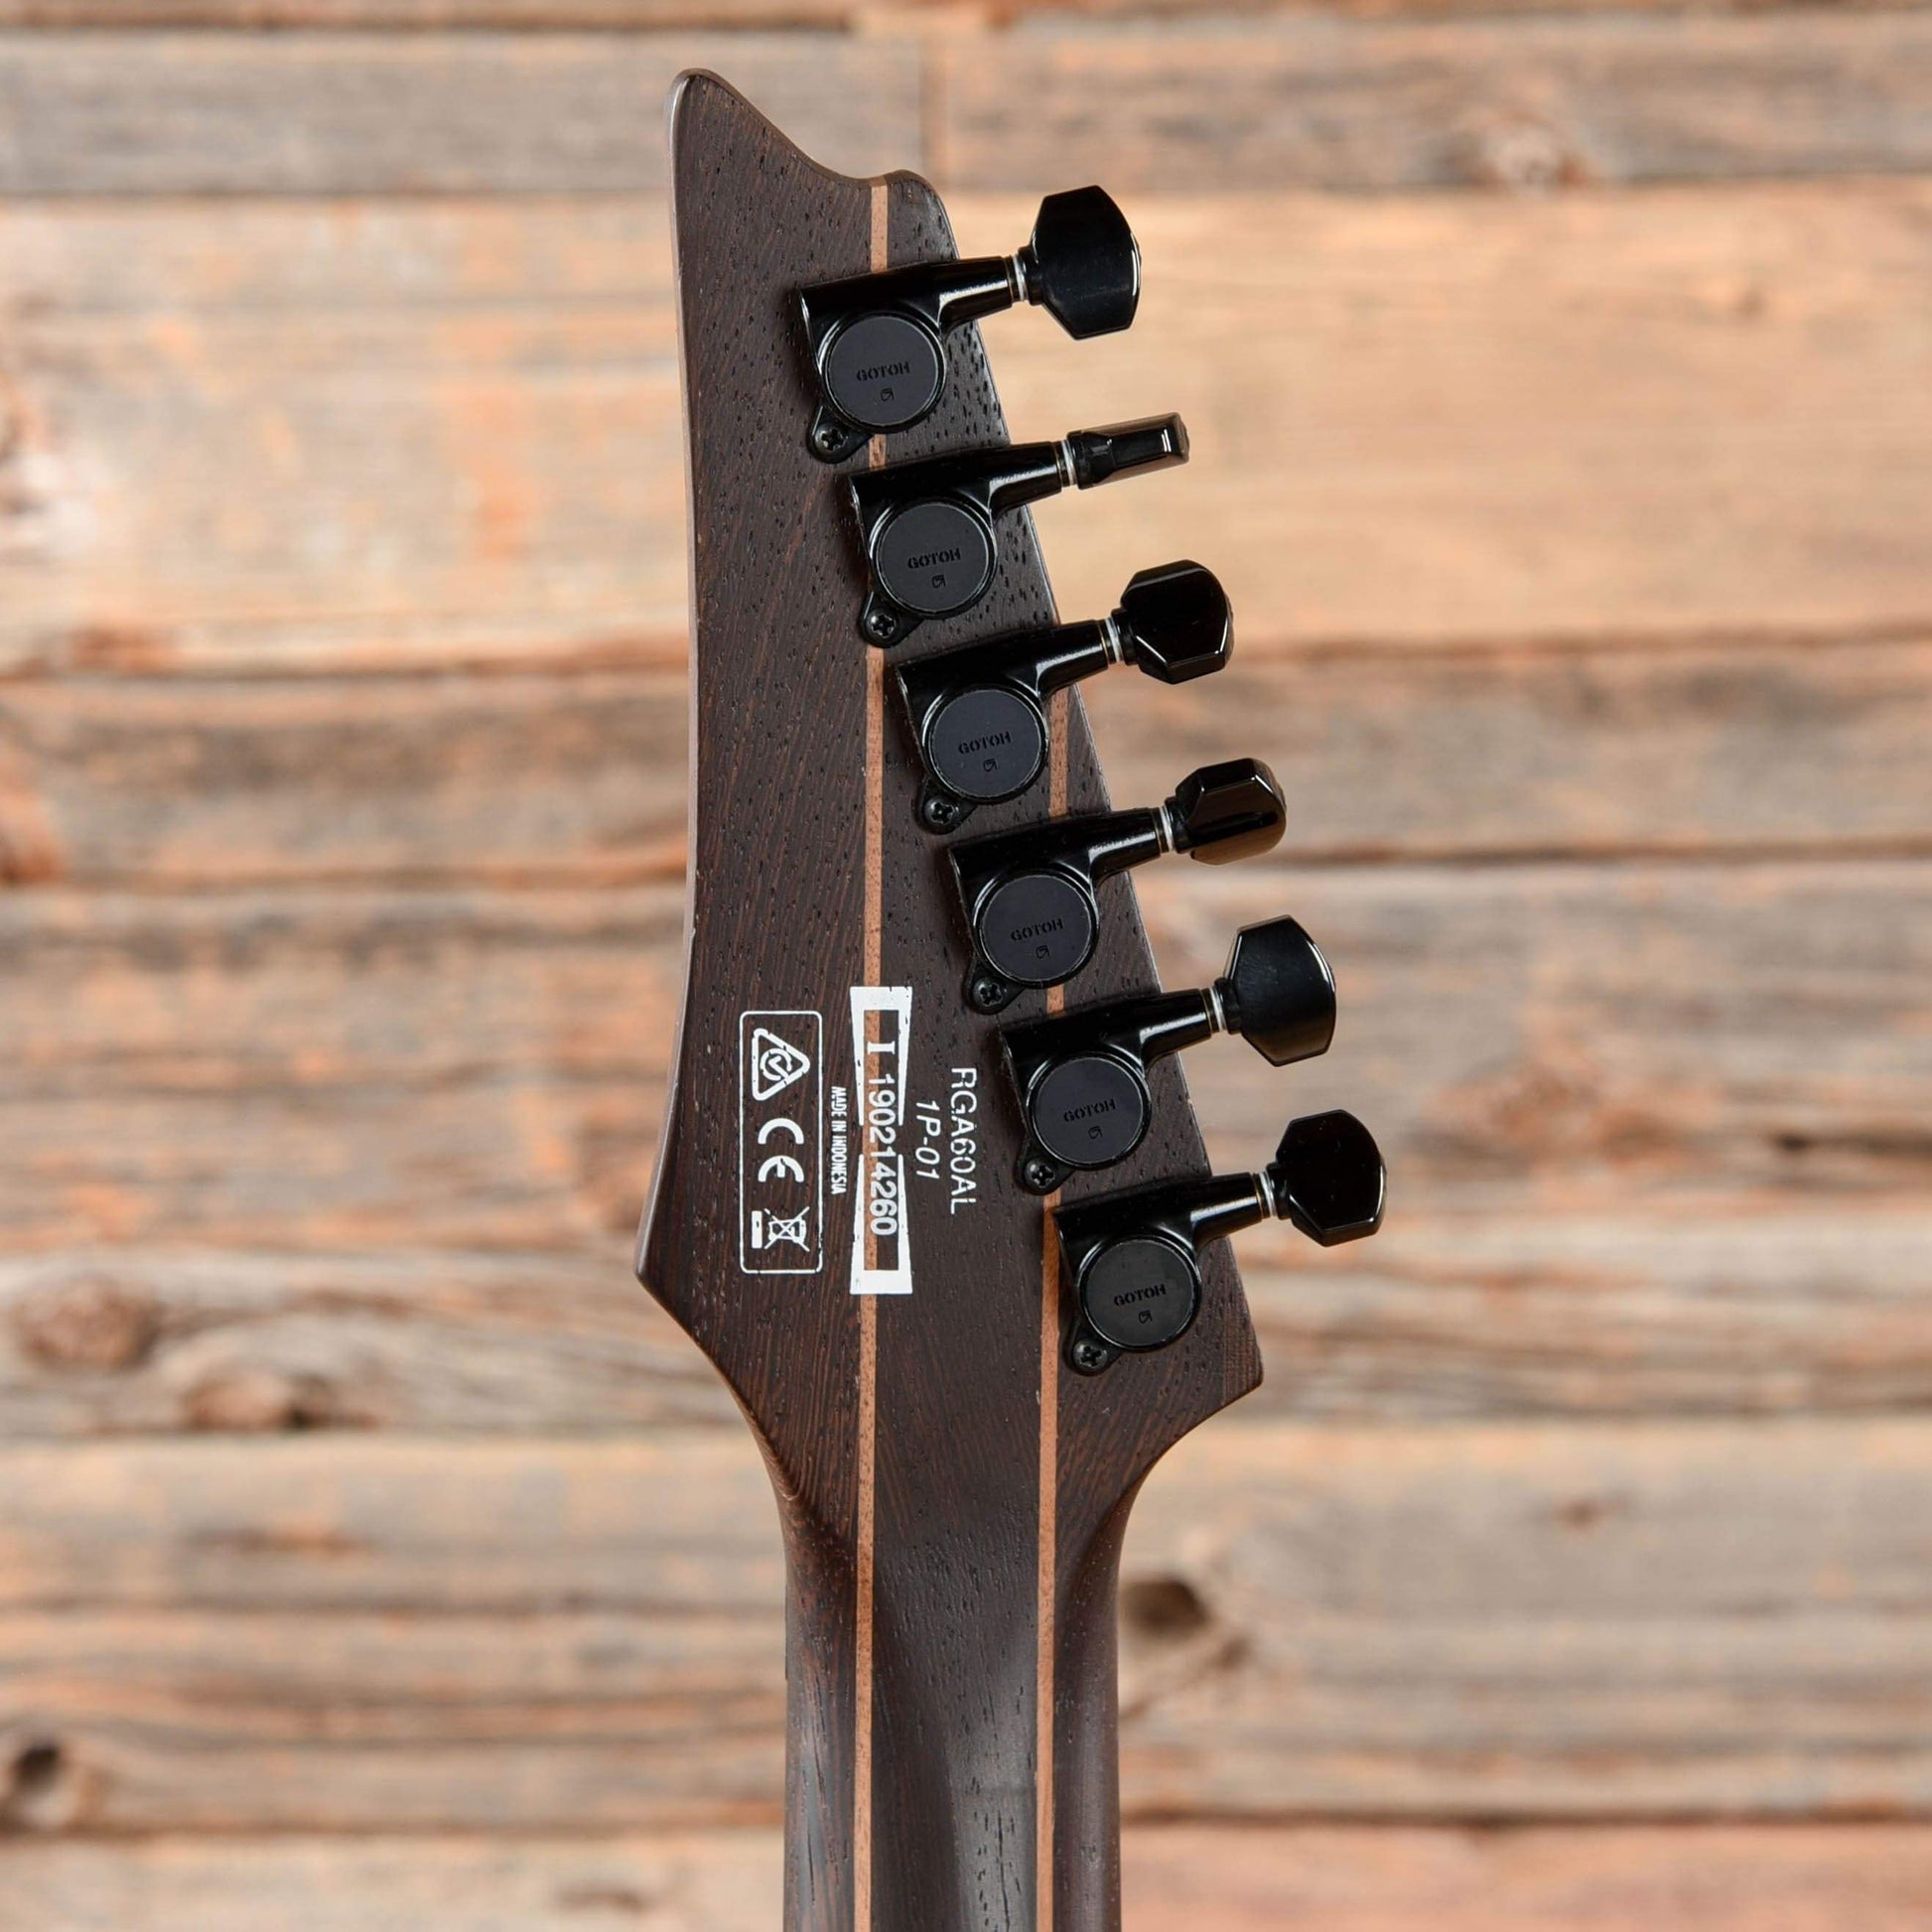 Ibanez RGA60AL-ABL Axion Label Antique Brown Stained Low Gloss 2019 Electric Guitars / Solid Body